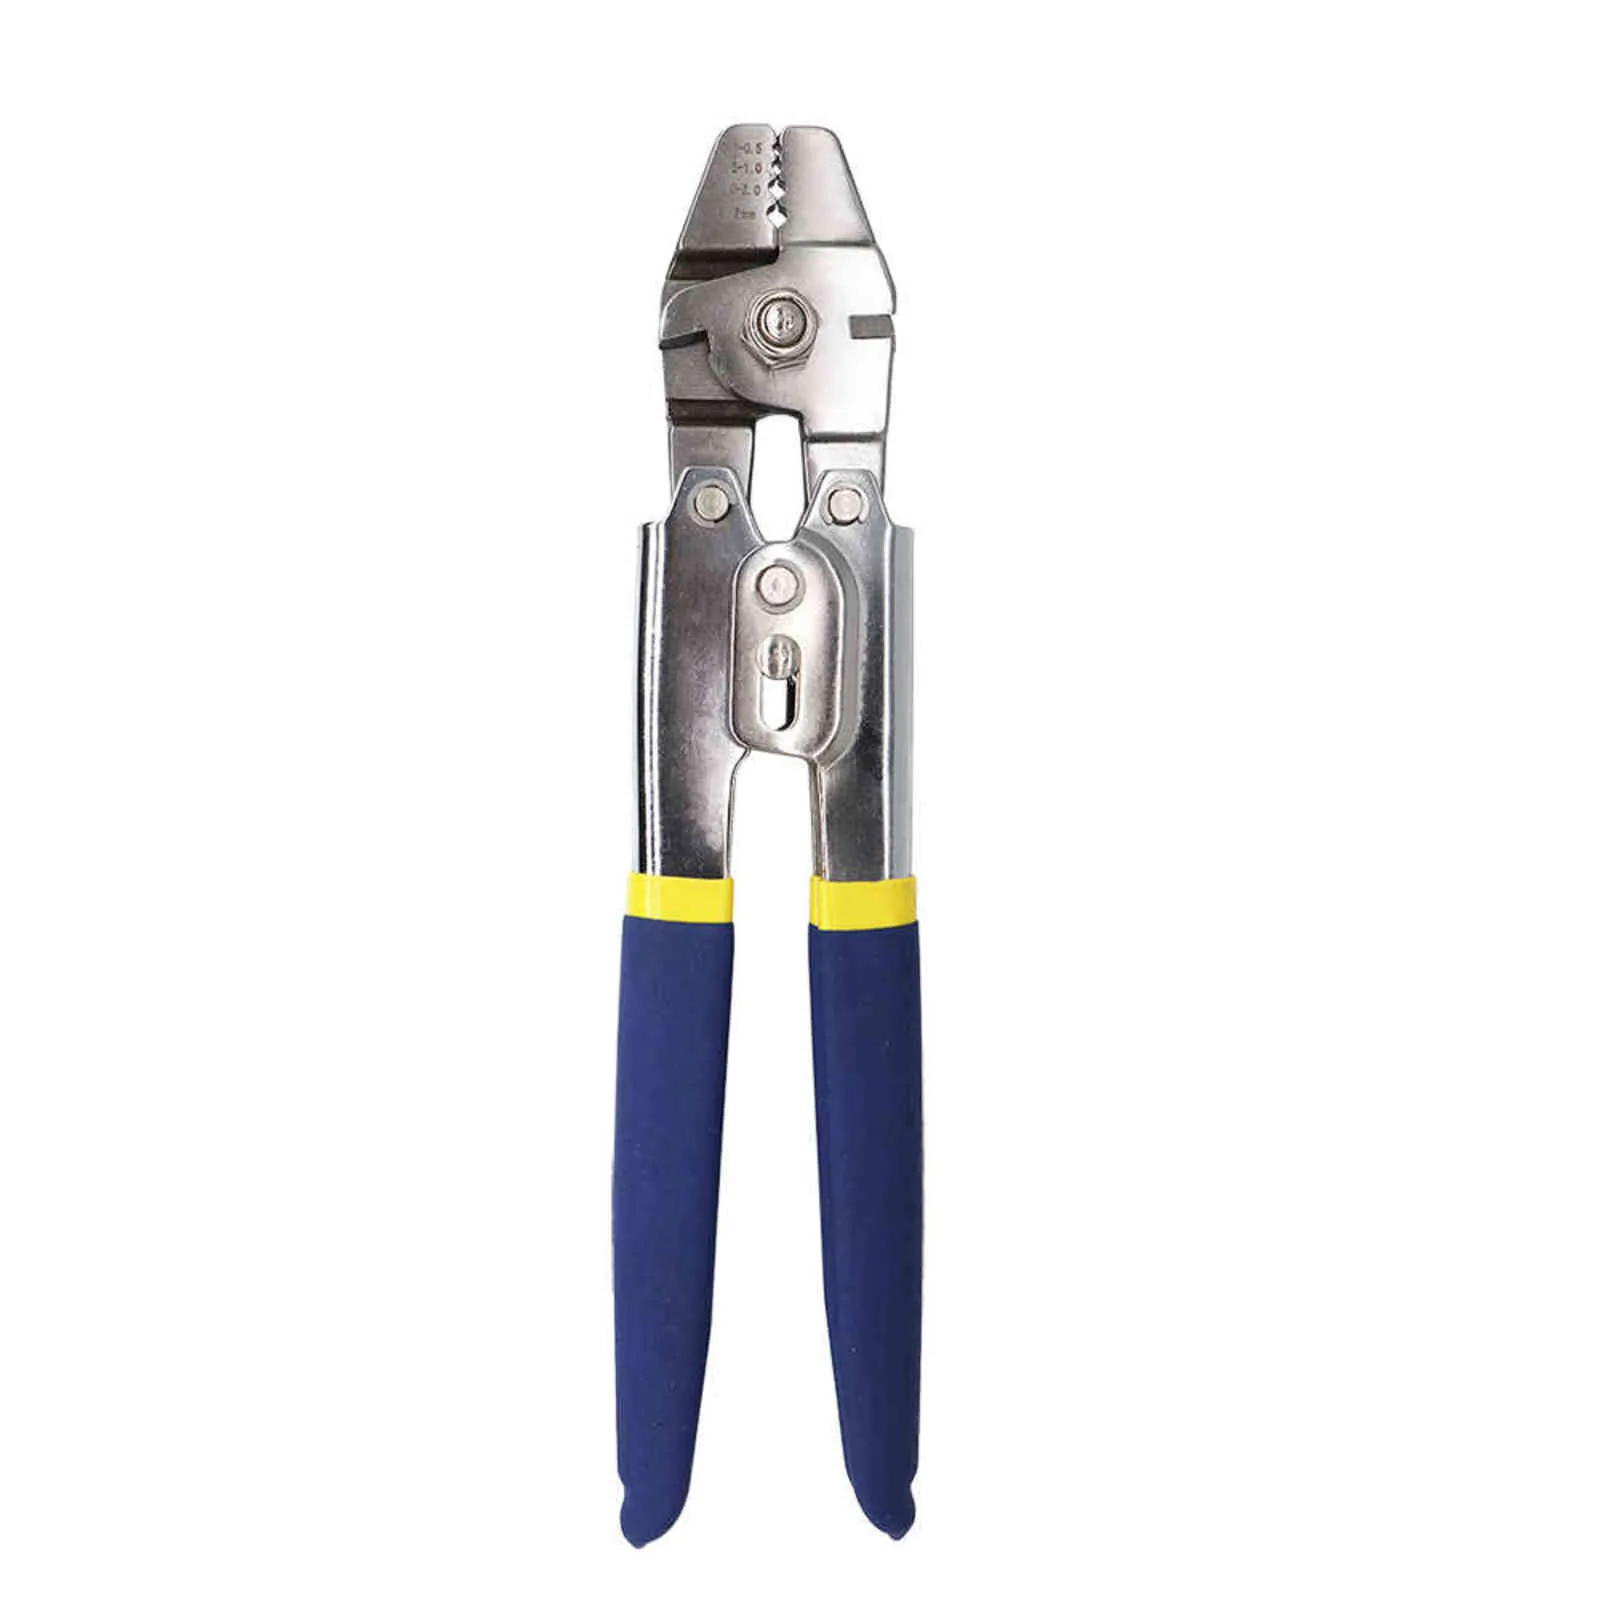 Wire Safety Rope Crimping Tool Fishing Crimping Tool With 1.2/1.5/2mm  Aluminum Double Barrel Ferrule Crimping Loop Sleeve Kit 211110 From Dou08,  $9.77